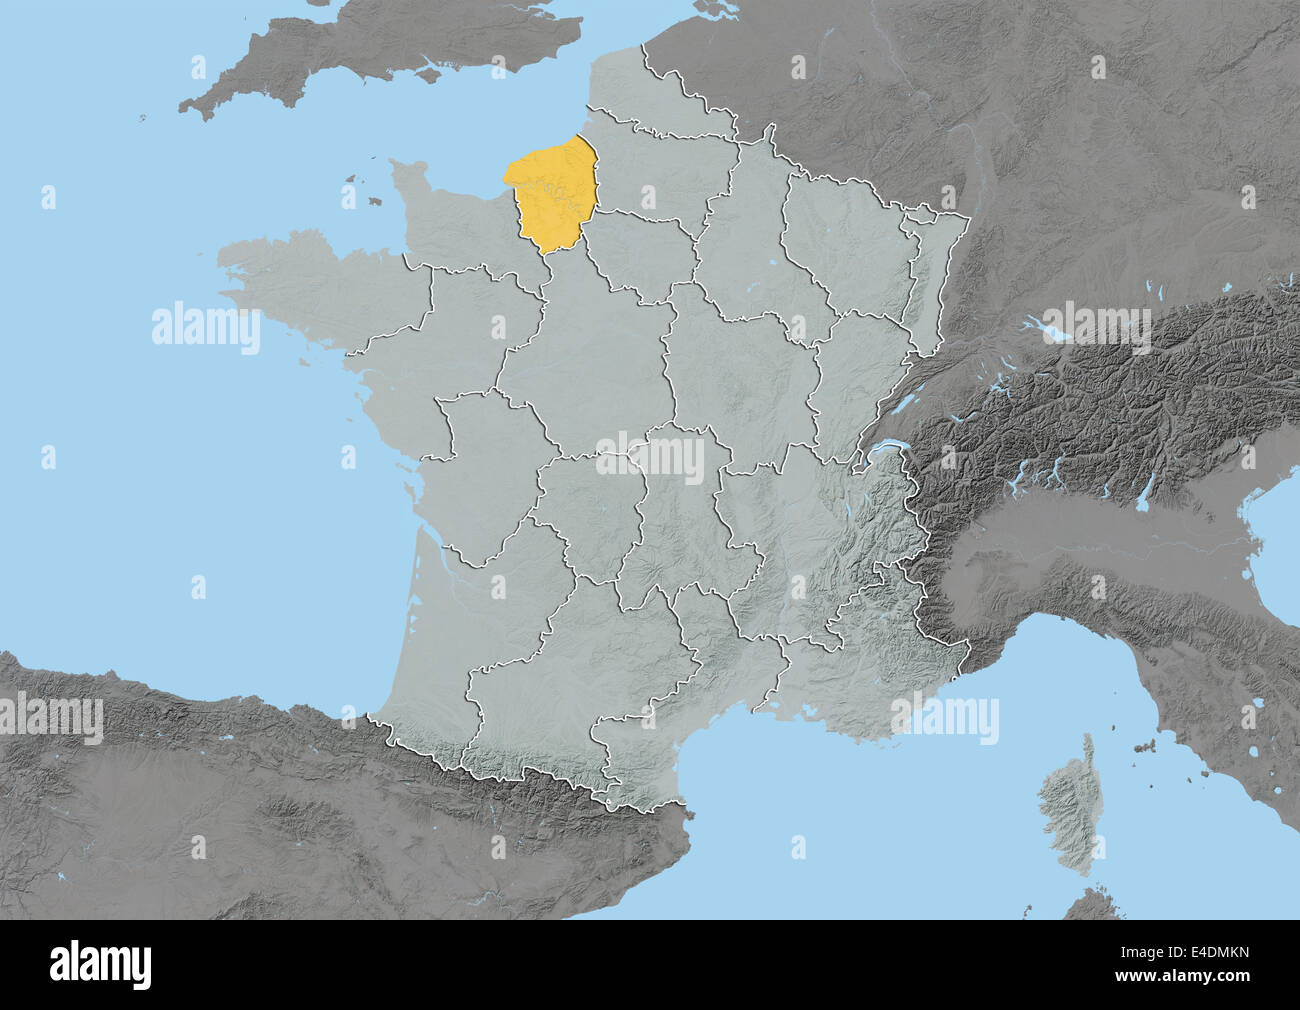 Region of Upper Normandy, France, Relief Map Stock Photo